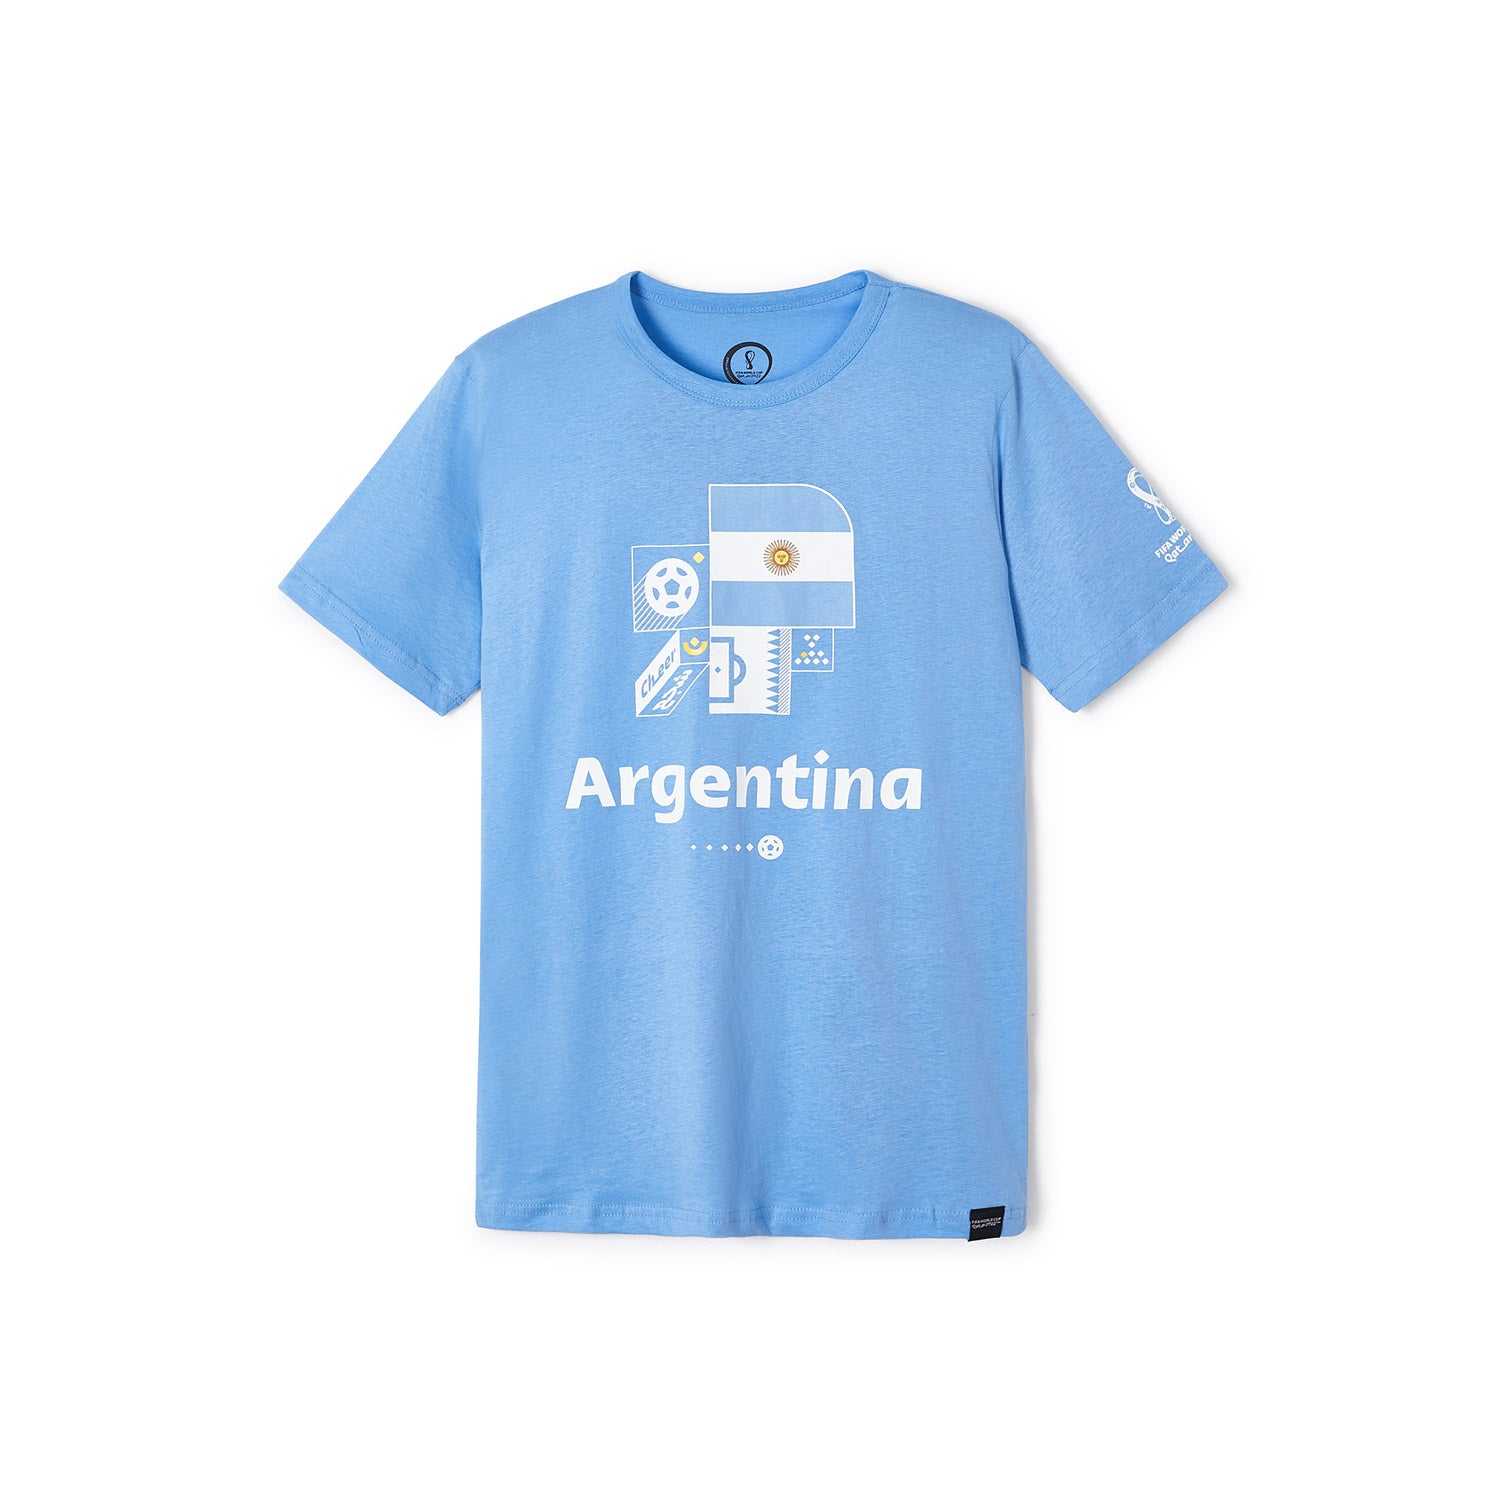 2022 World Cup Argentina Light Blue T-Shirt - Youth